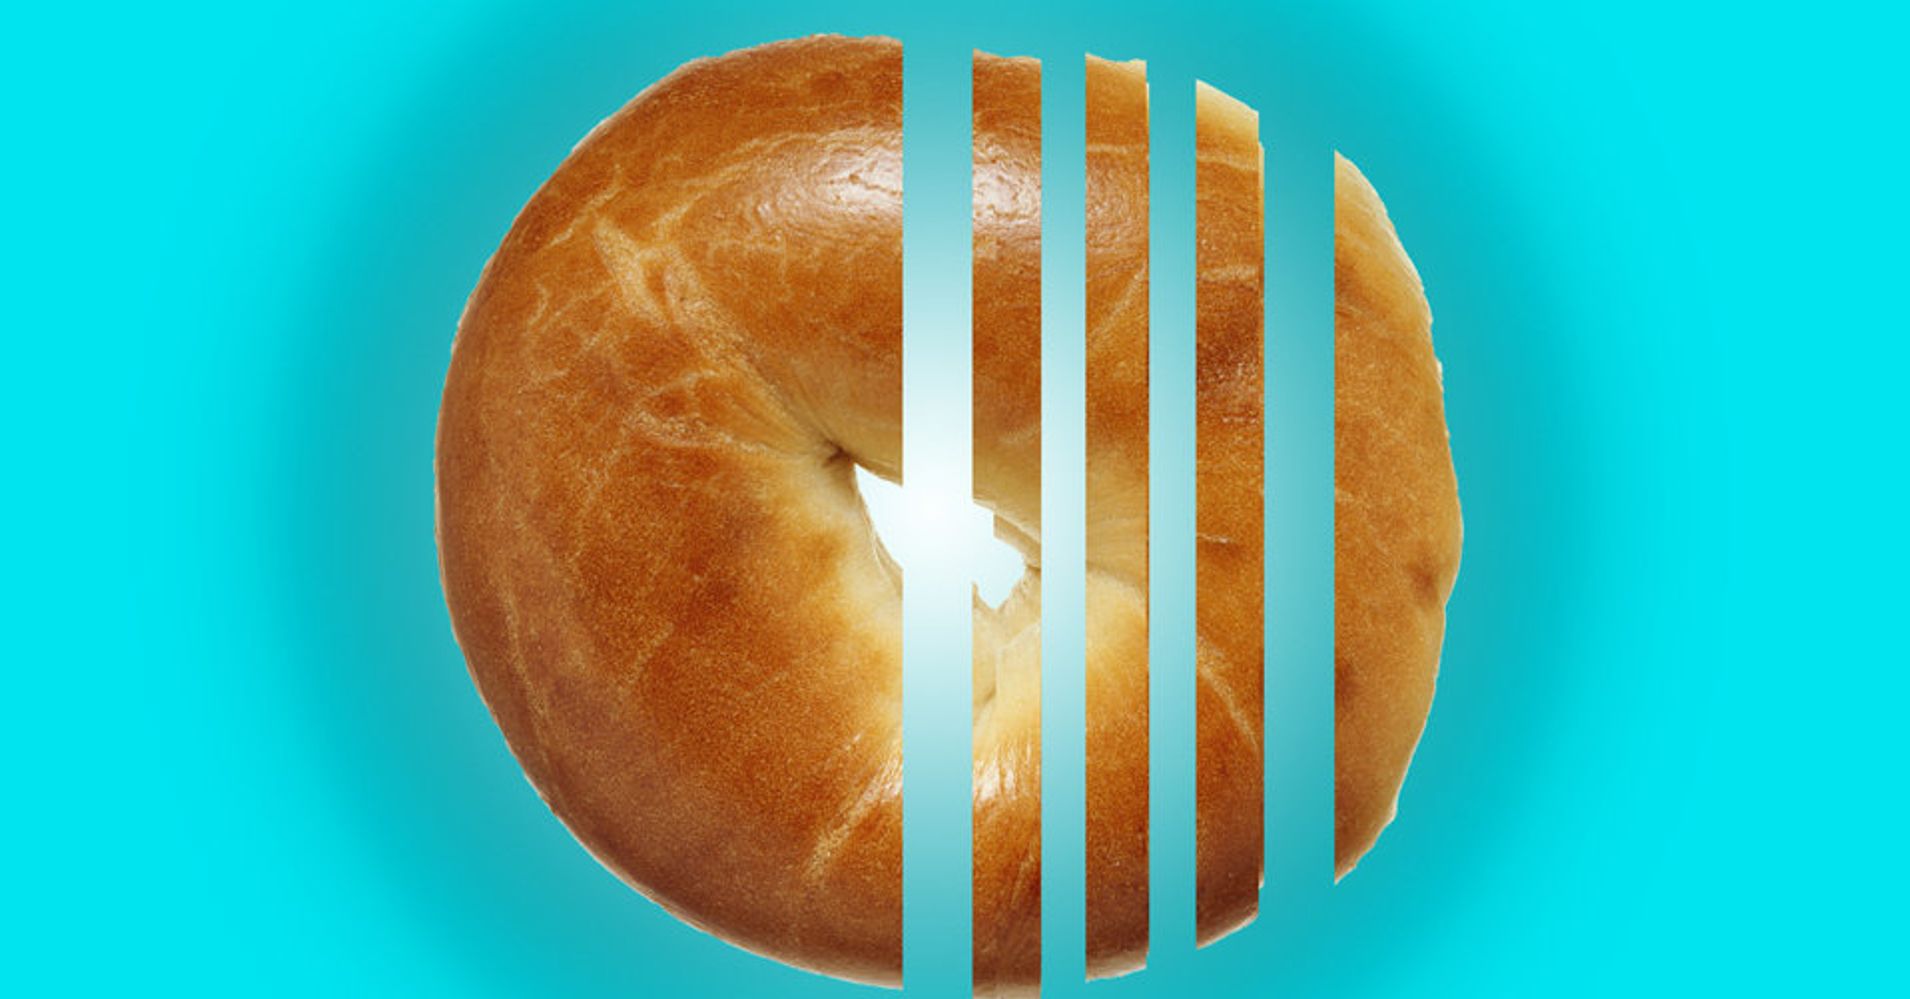 People Are Losing Their Minds Over A Photo Of Bagels Sliced Like Bread | HuffPost